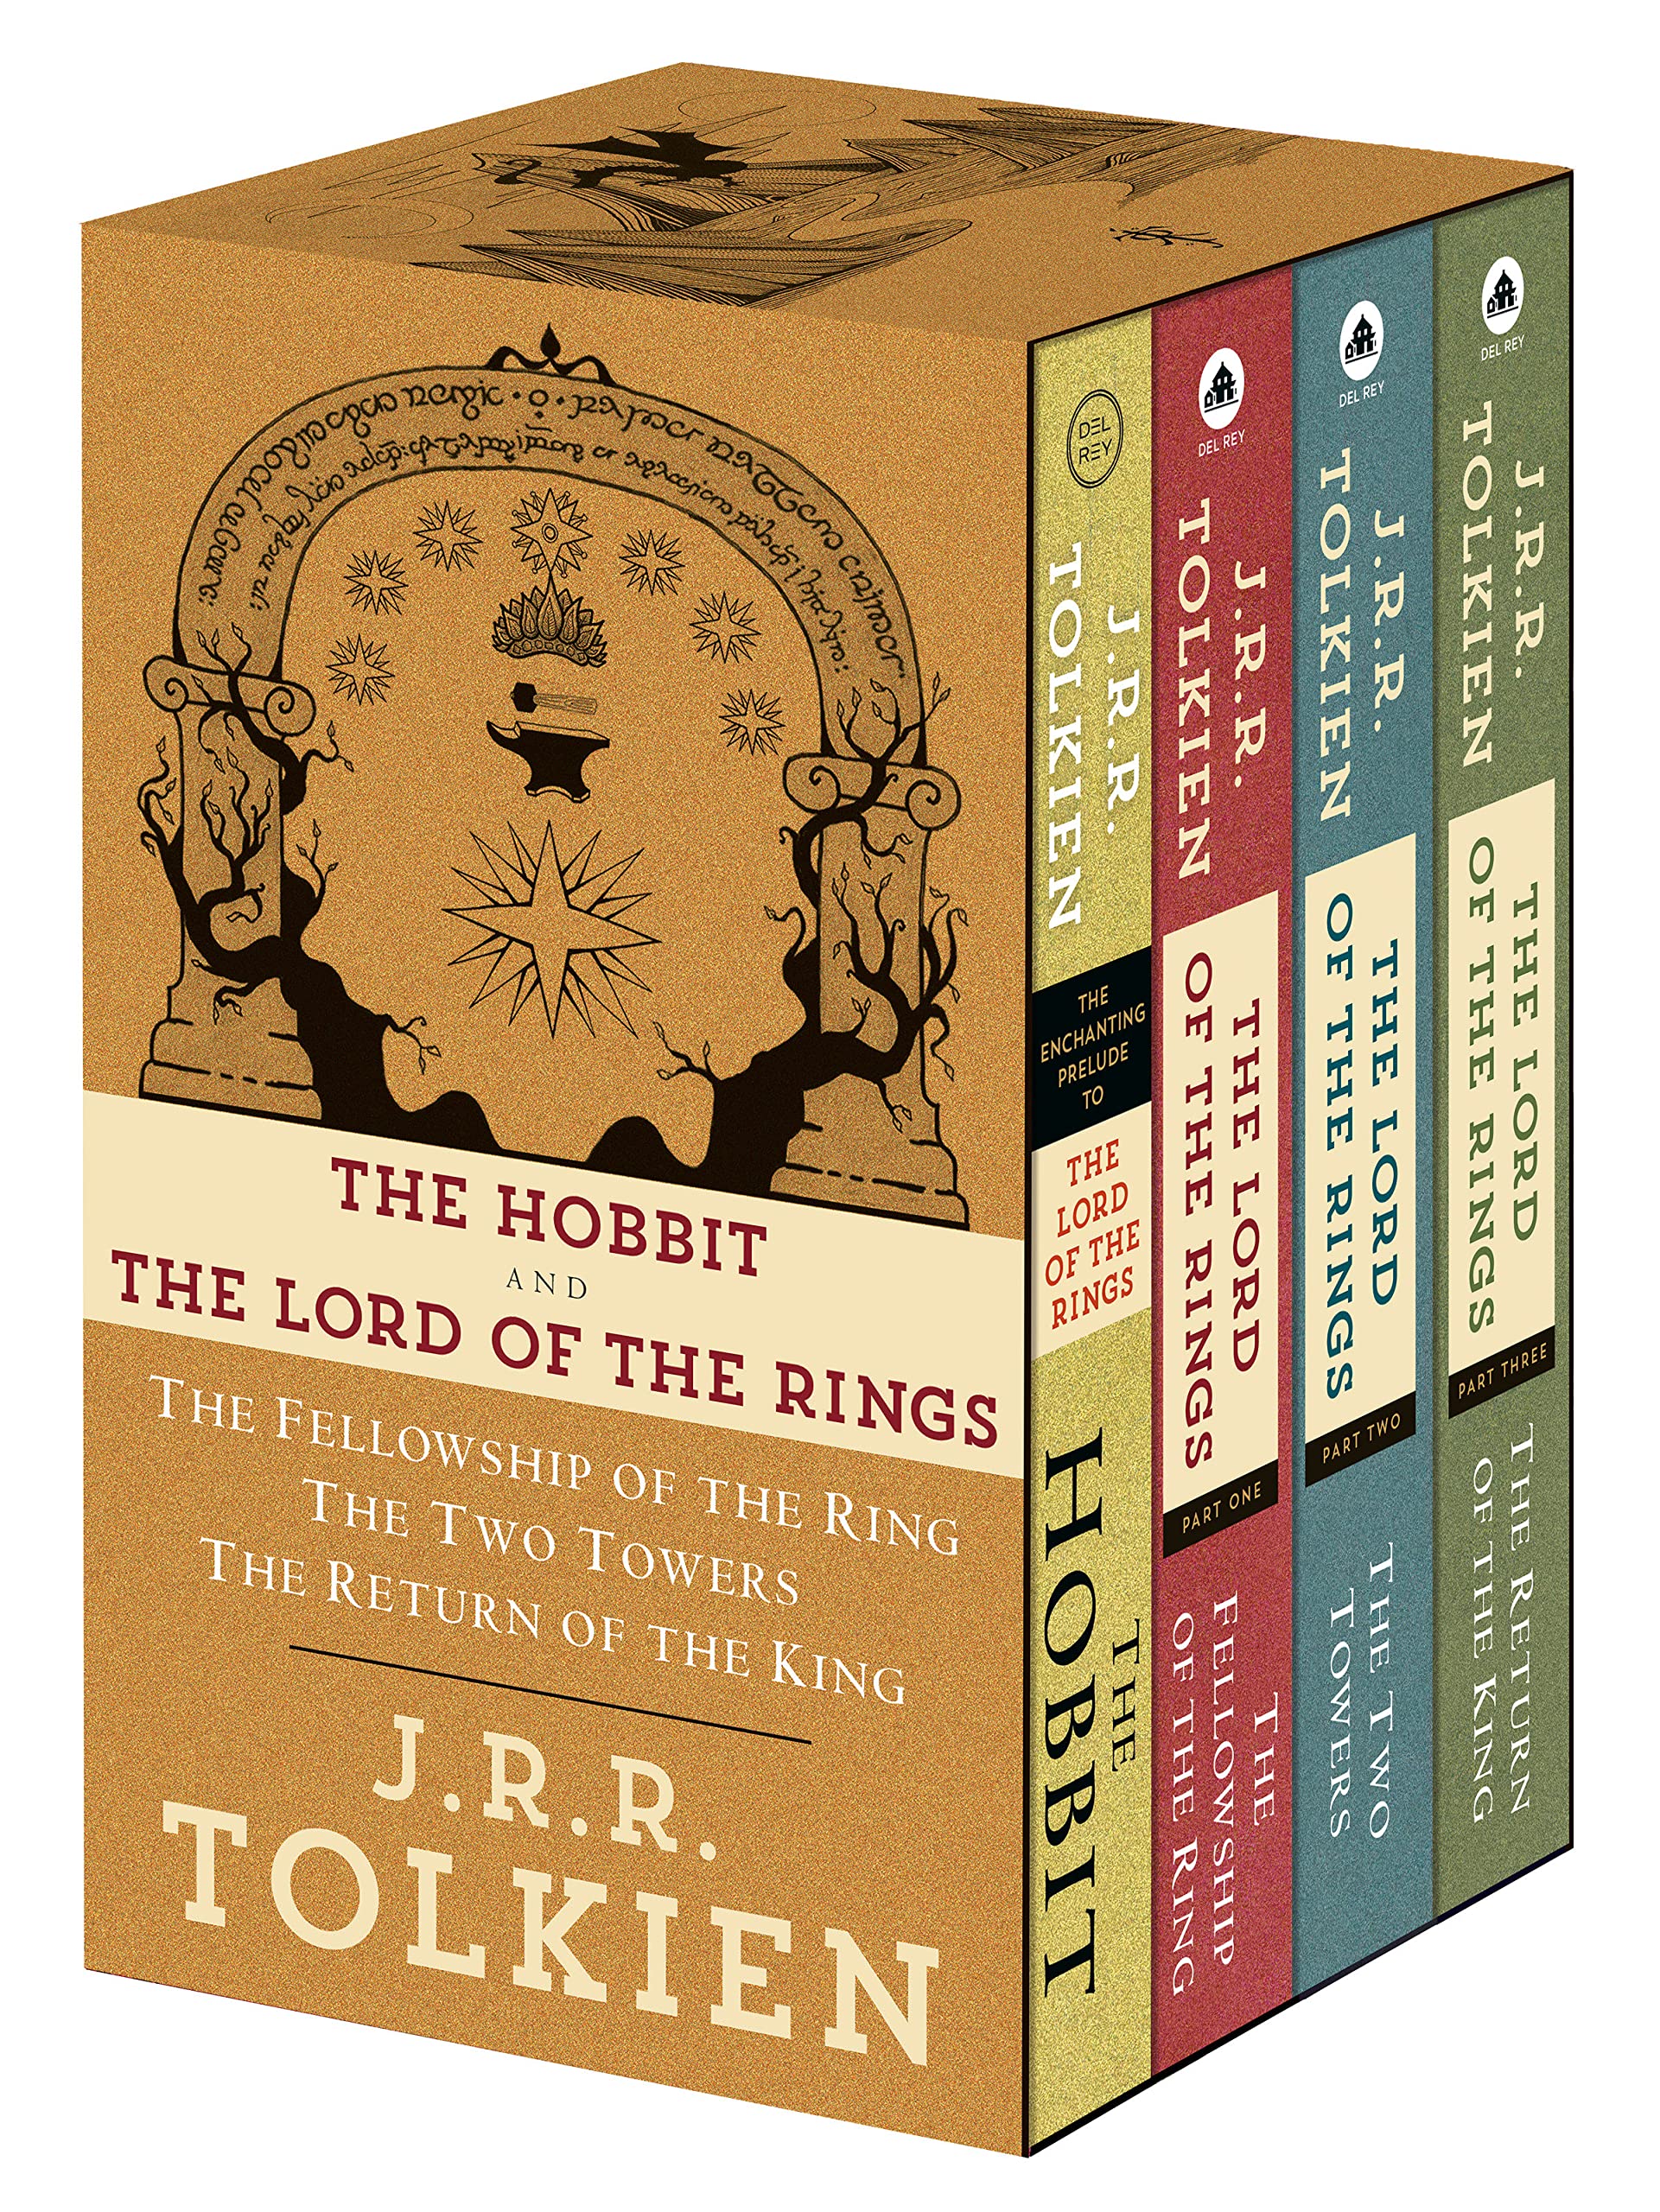 Prime Exclusive: Book Boxed Sets (J.R.R. Tolkien 4-Book Set $12.49, Stephen King Three Classic Novels Set $20.94, Game of Thrones 5-Book Set $23.46 & More) + Free Shipping